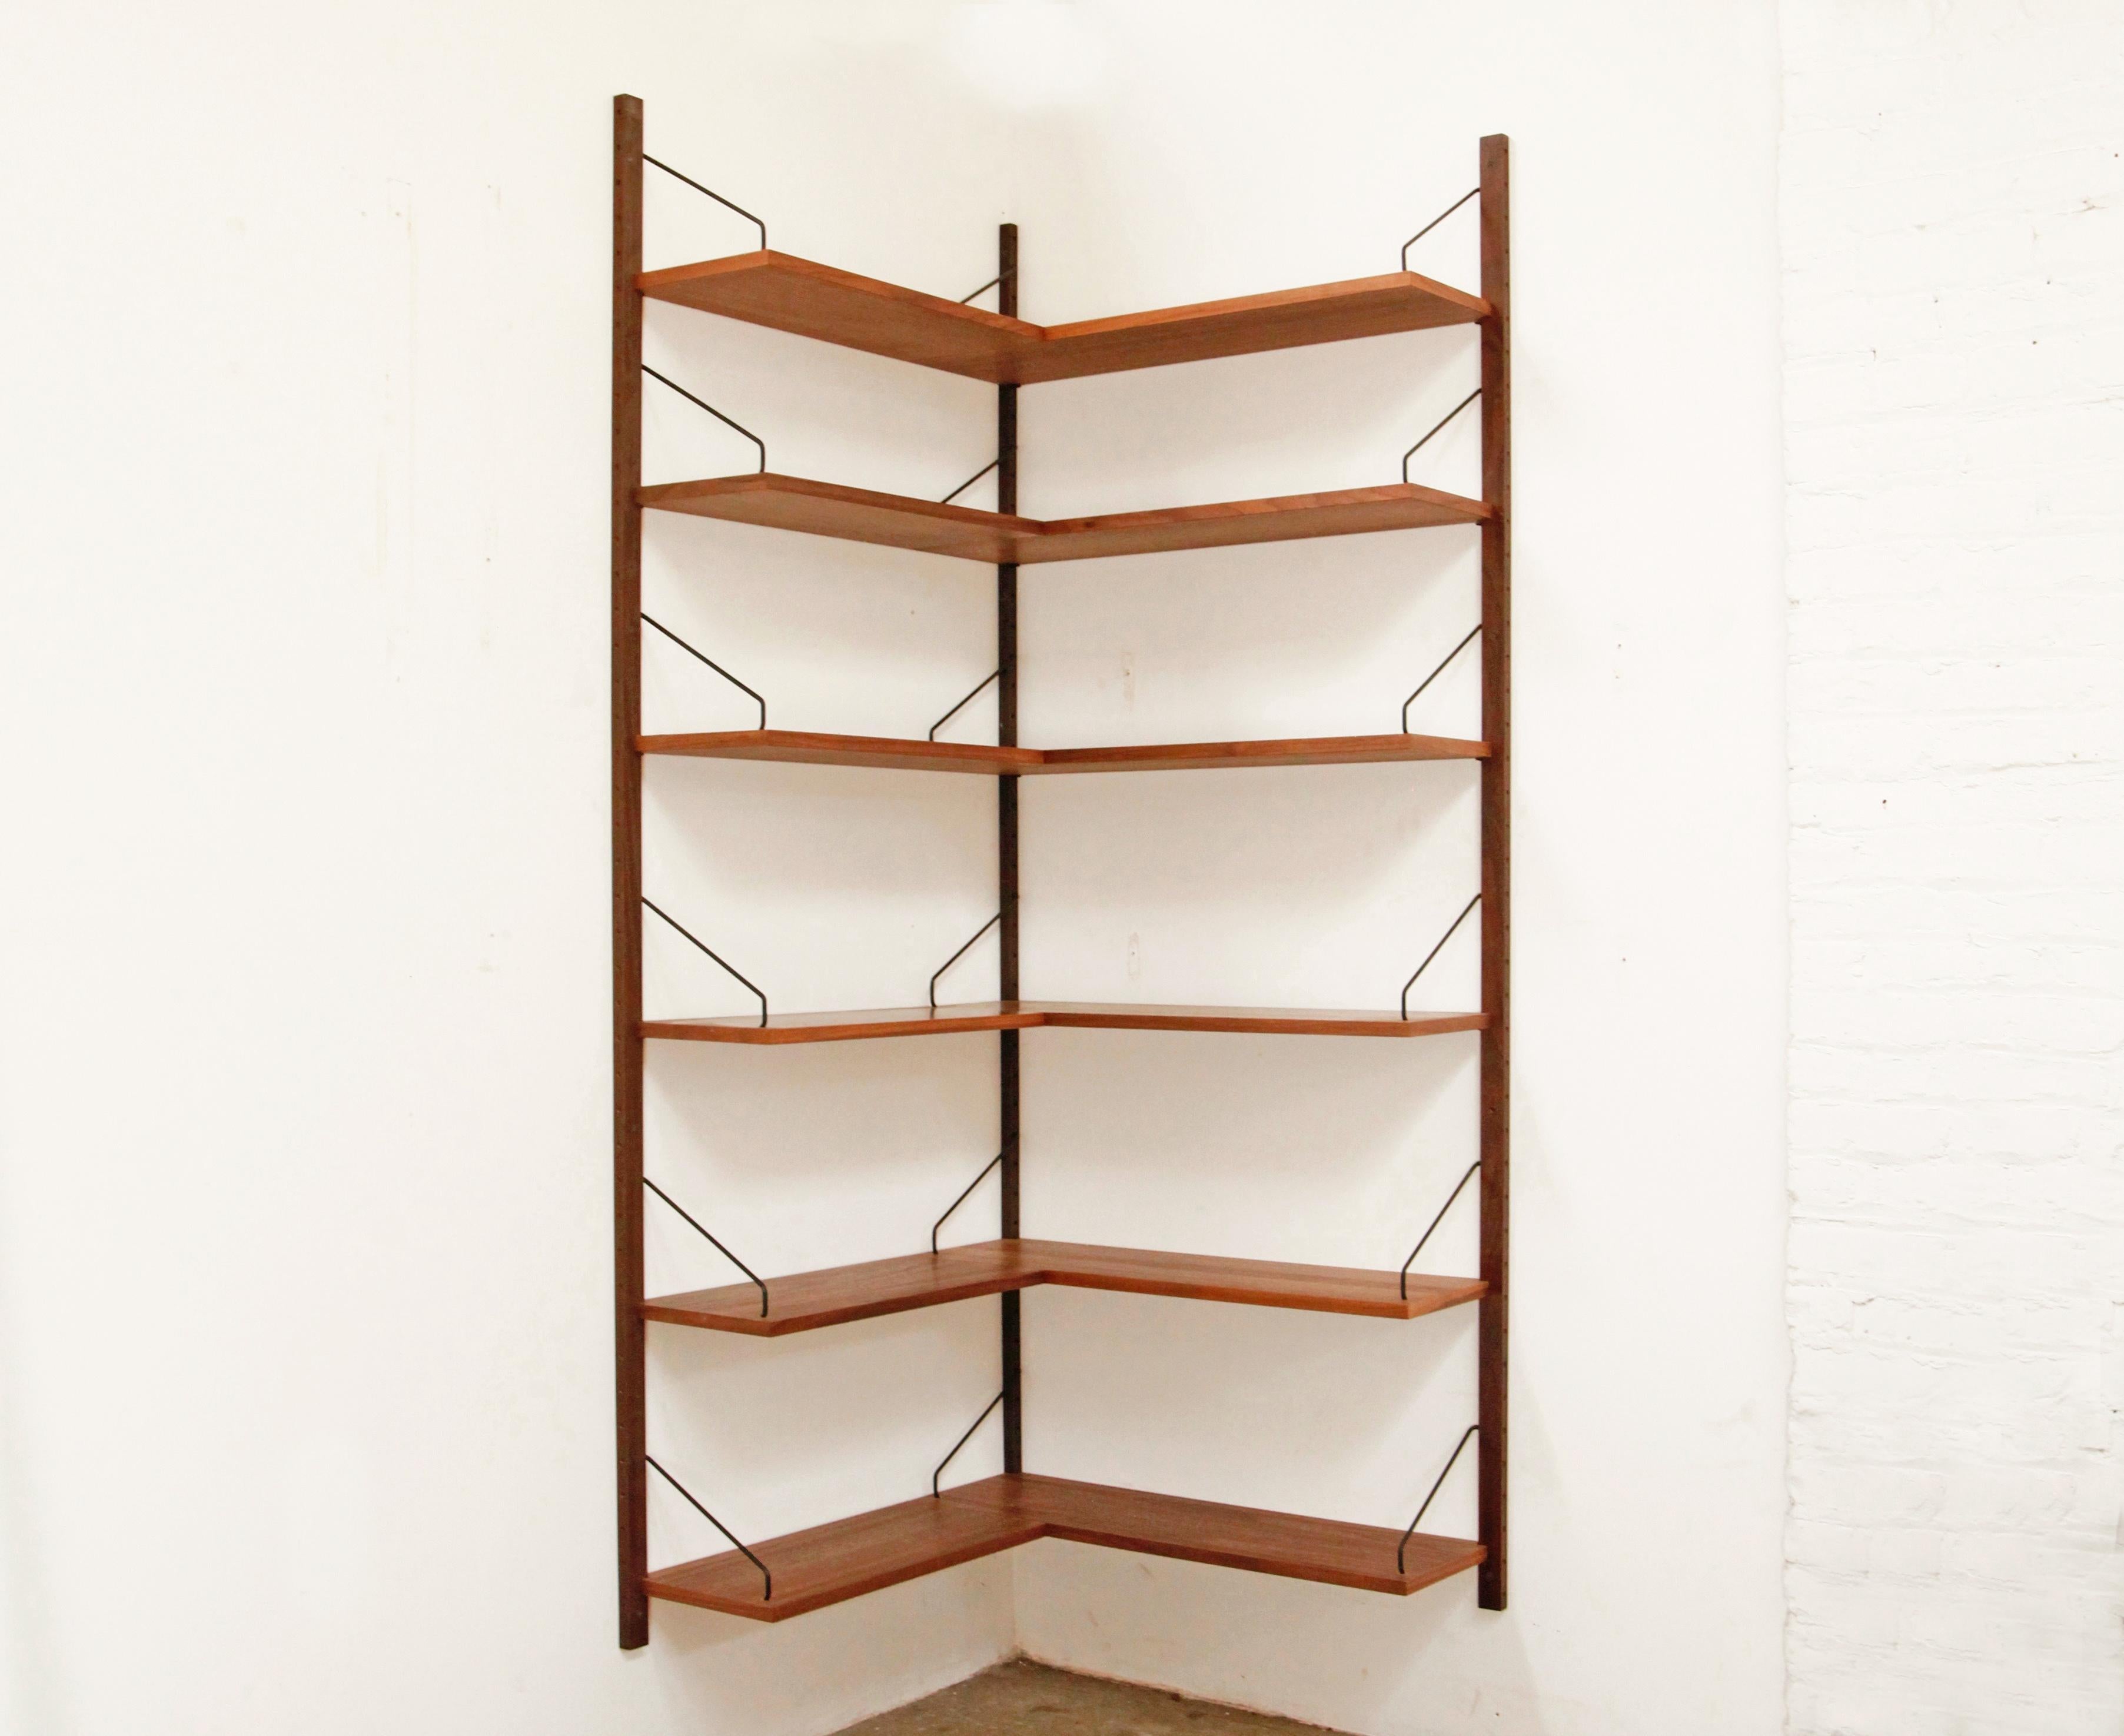 Rare deadstock Royal System corner bookshelf in walnut by Poul Cadovius. These shelves were taken out of their original boxes to be installed for this photo only. It has been deinstalled and put back in it's original boxes. Perfect deadstock